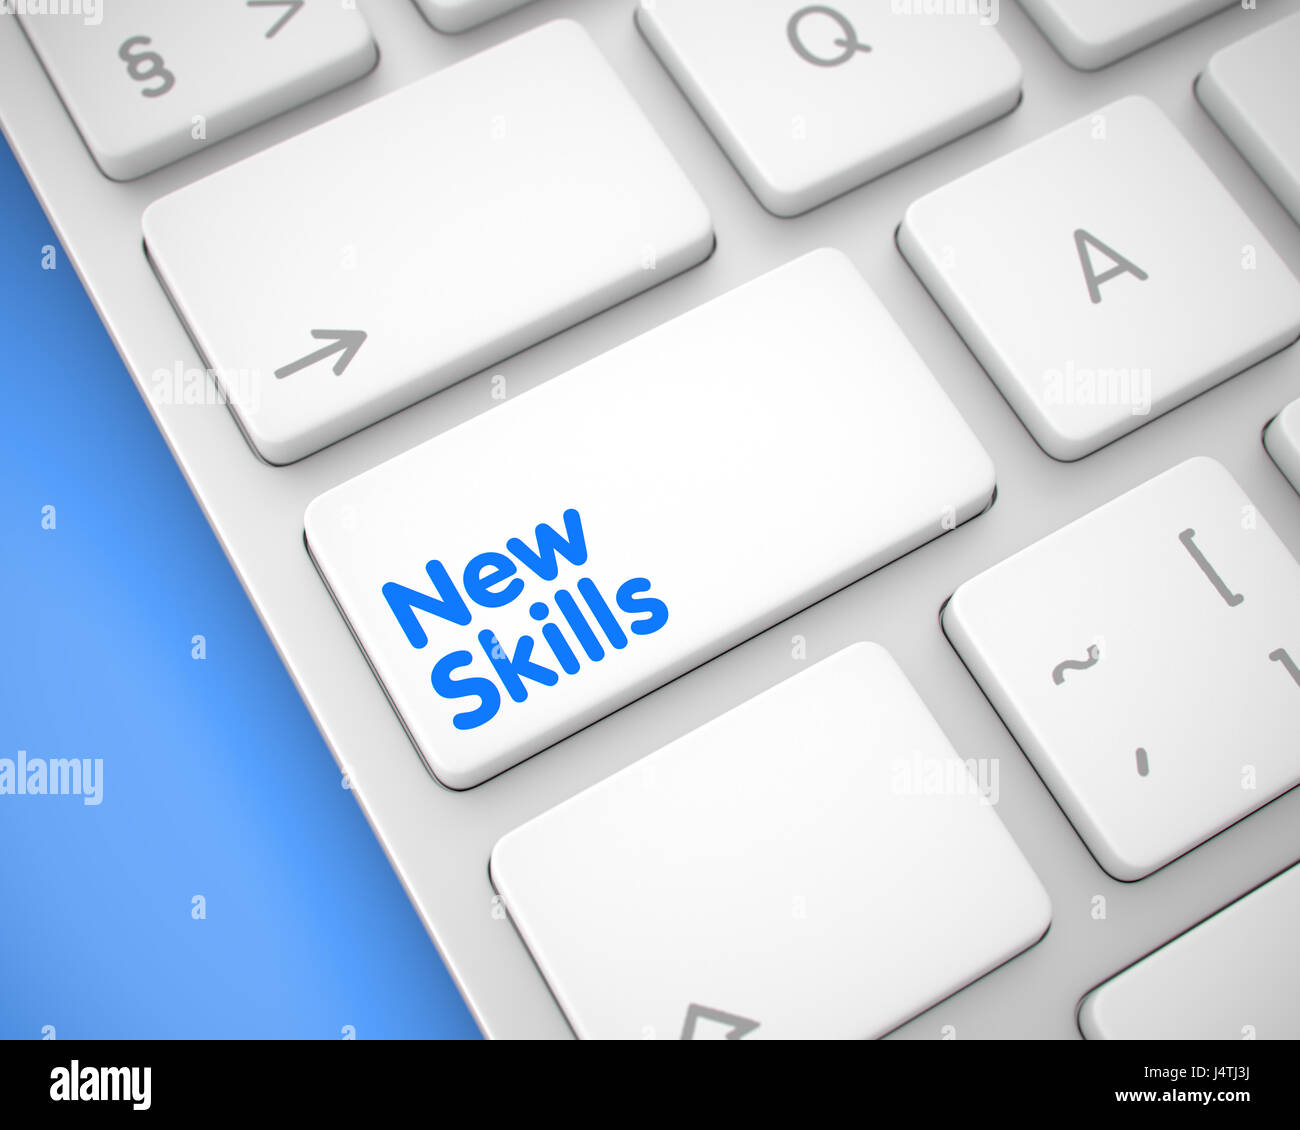 New Skills - Message on the White Keyboard Keypad. 3D. Stock Photo